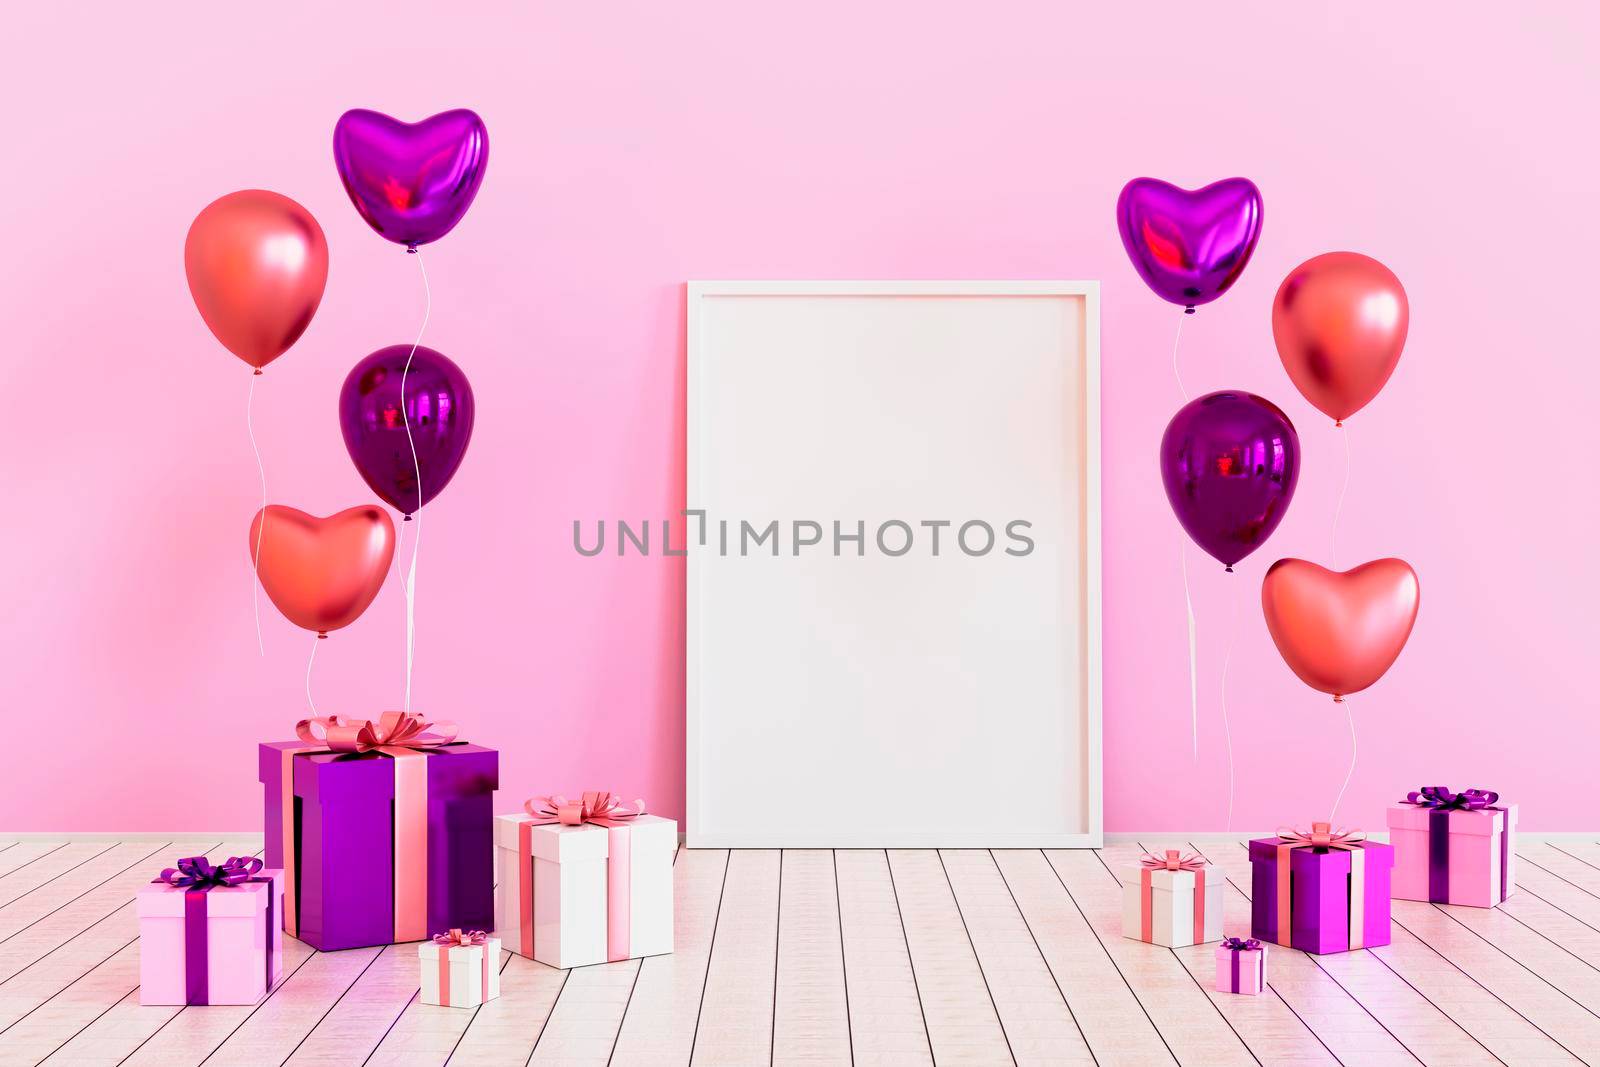 Poster mock up with pink glossy 3d realistic balloons in heart shape. Valentine's Day or wedding day romantic themes for party, events, social media or promotion banner, posters.3d render